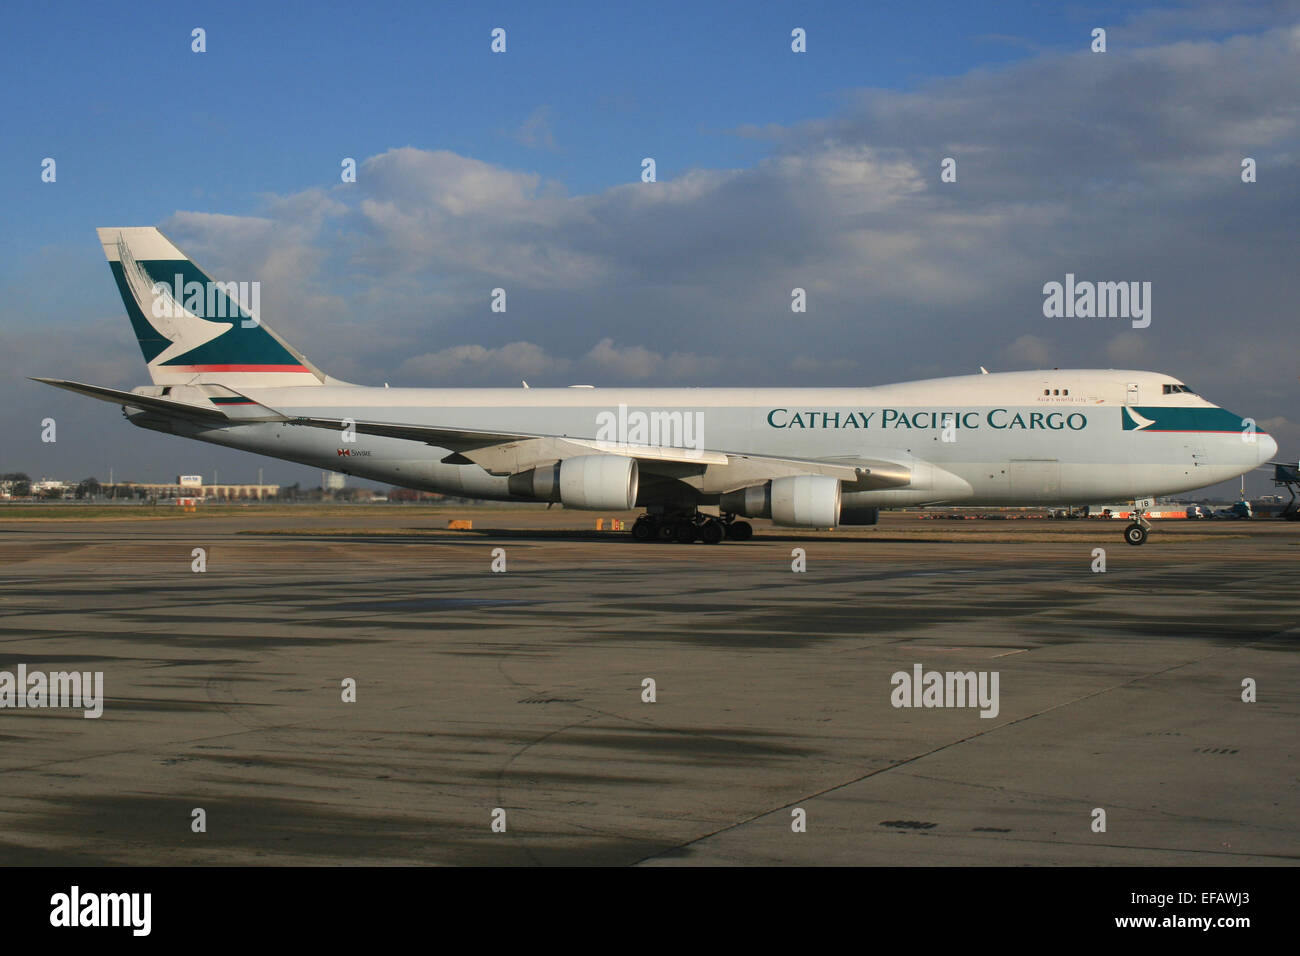 CATHAY PACIFIC CARGO BOEING 747 Stock Photo